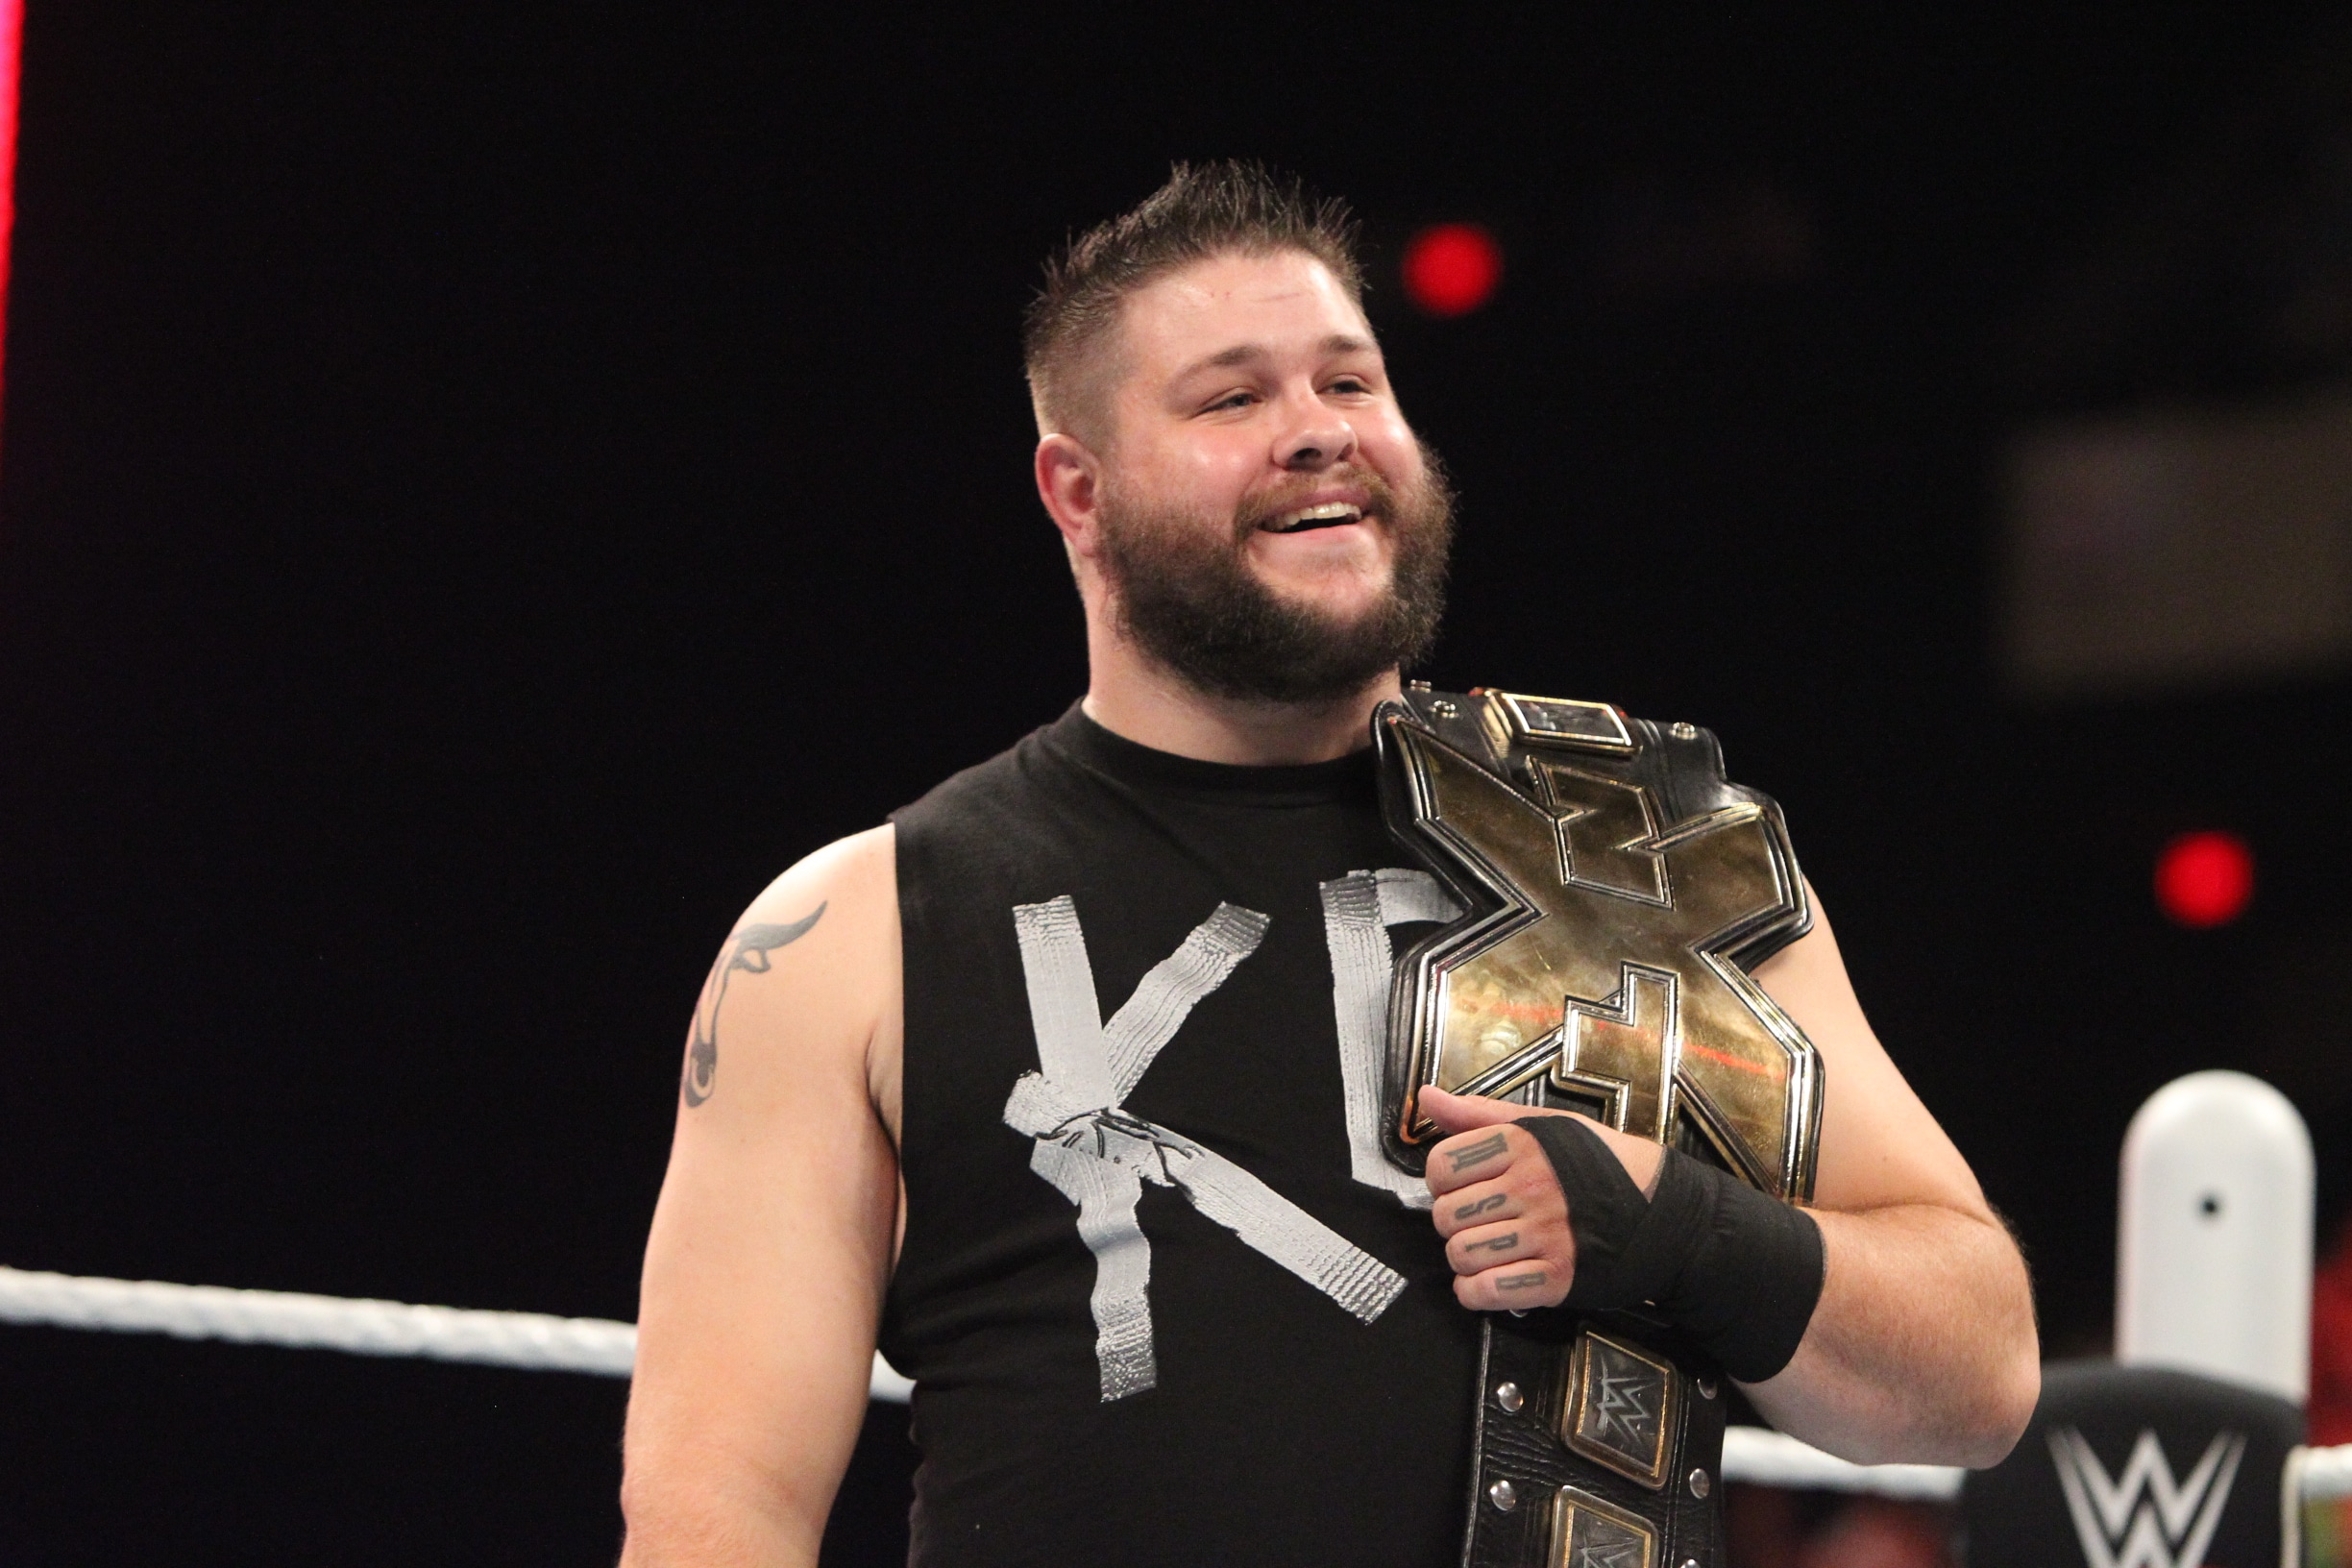 Kevin Owens as NXT Champion